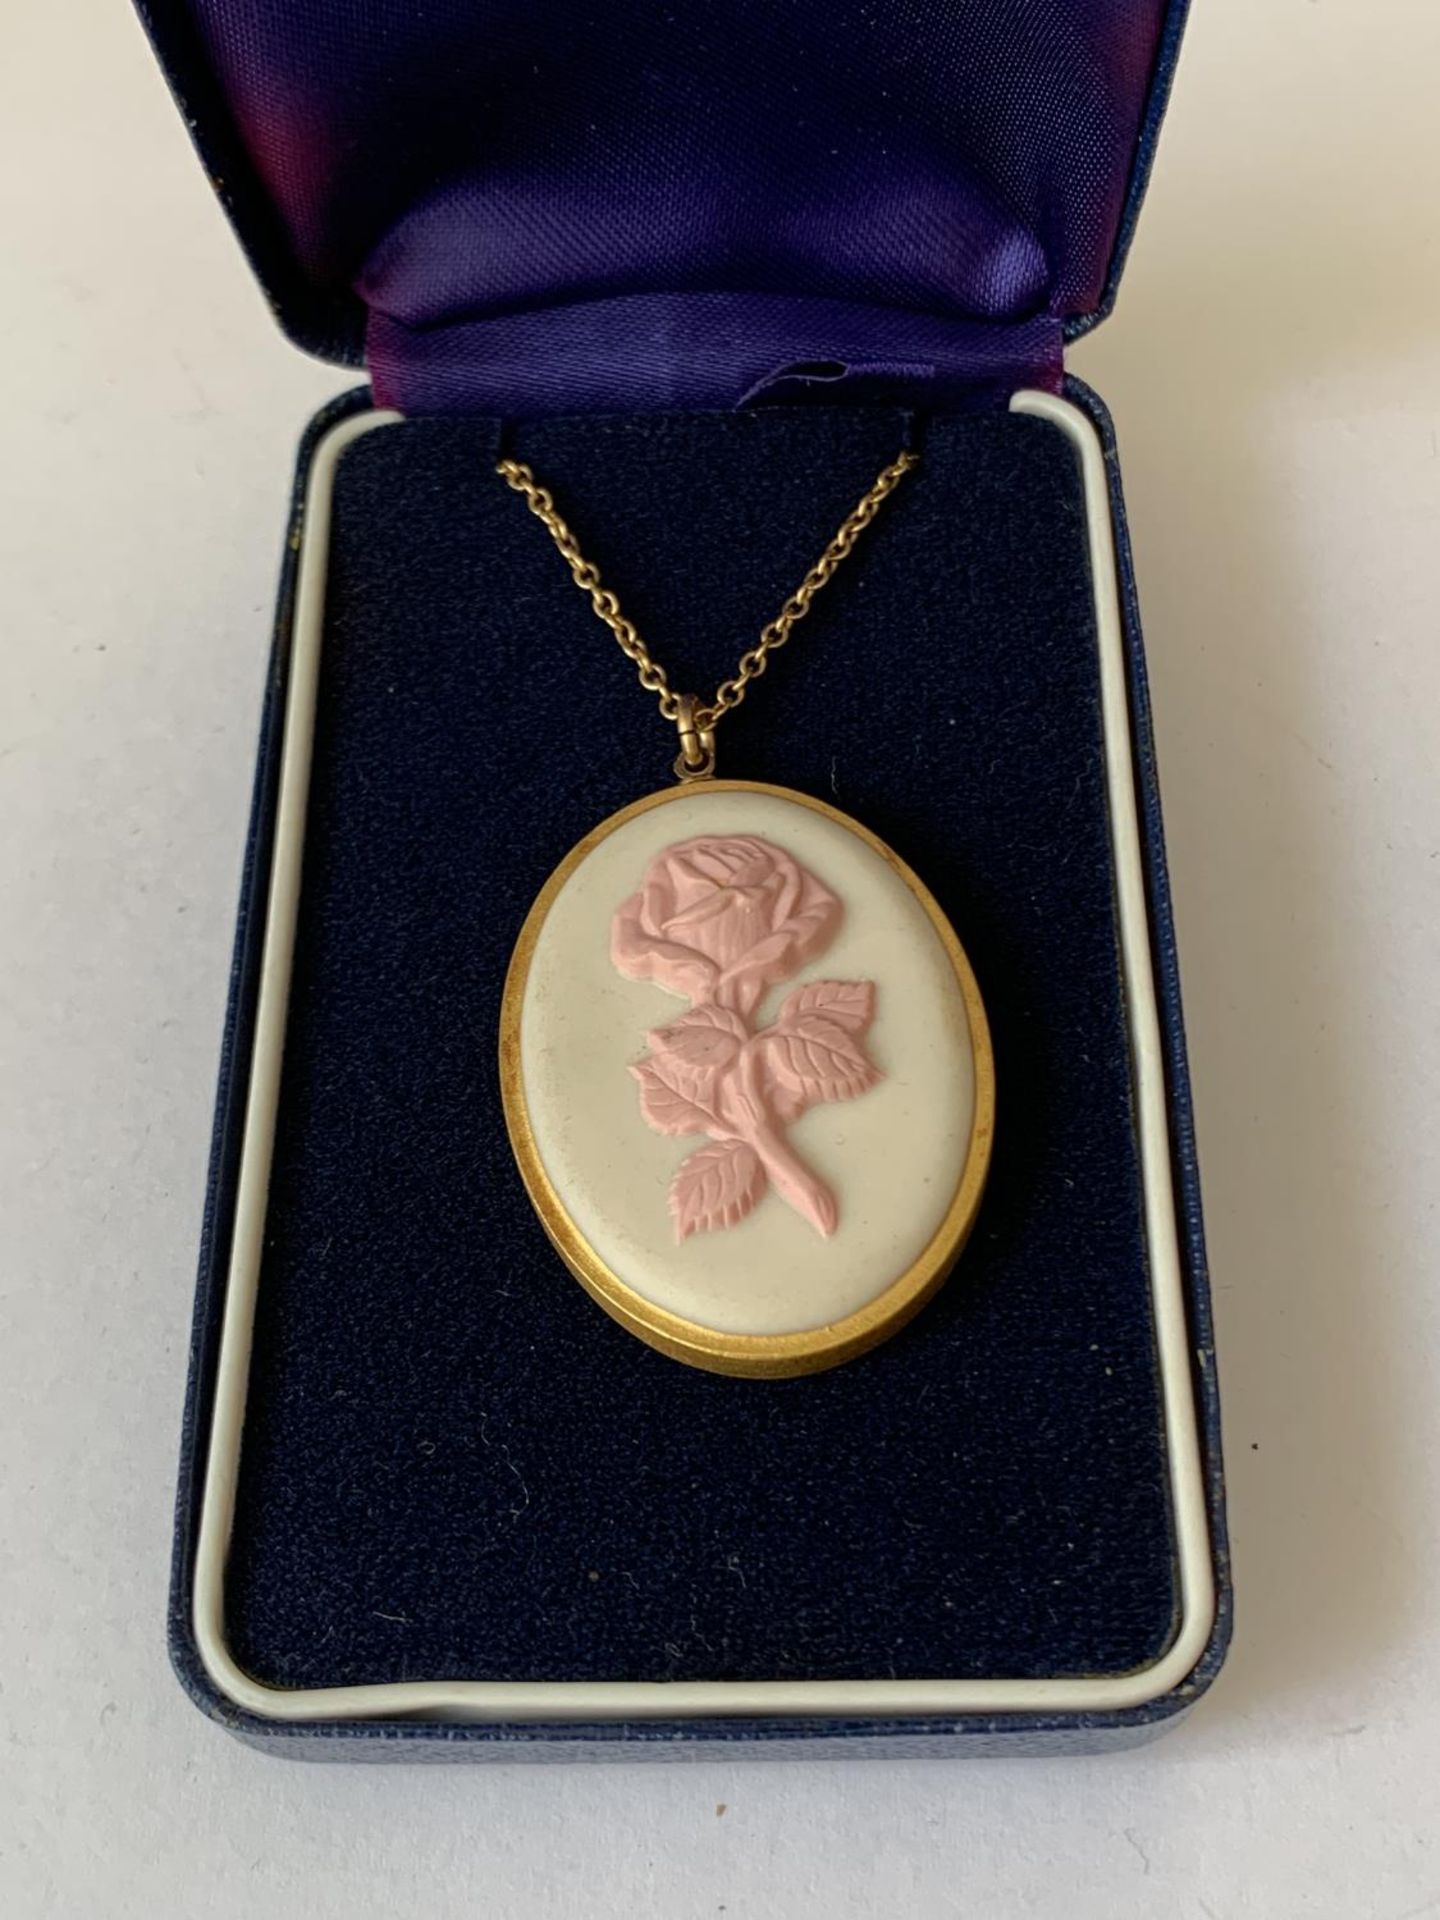 A PINK WEDGEWOOD JASPERWARE NECKLACE IN A PRESENTATION BOX